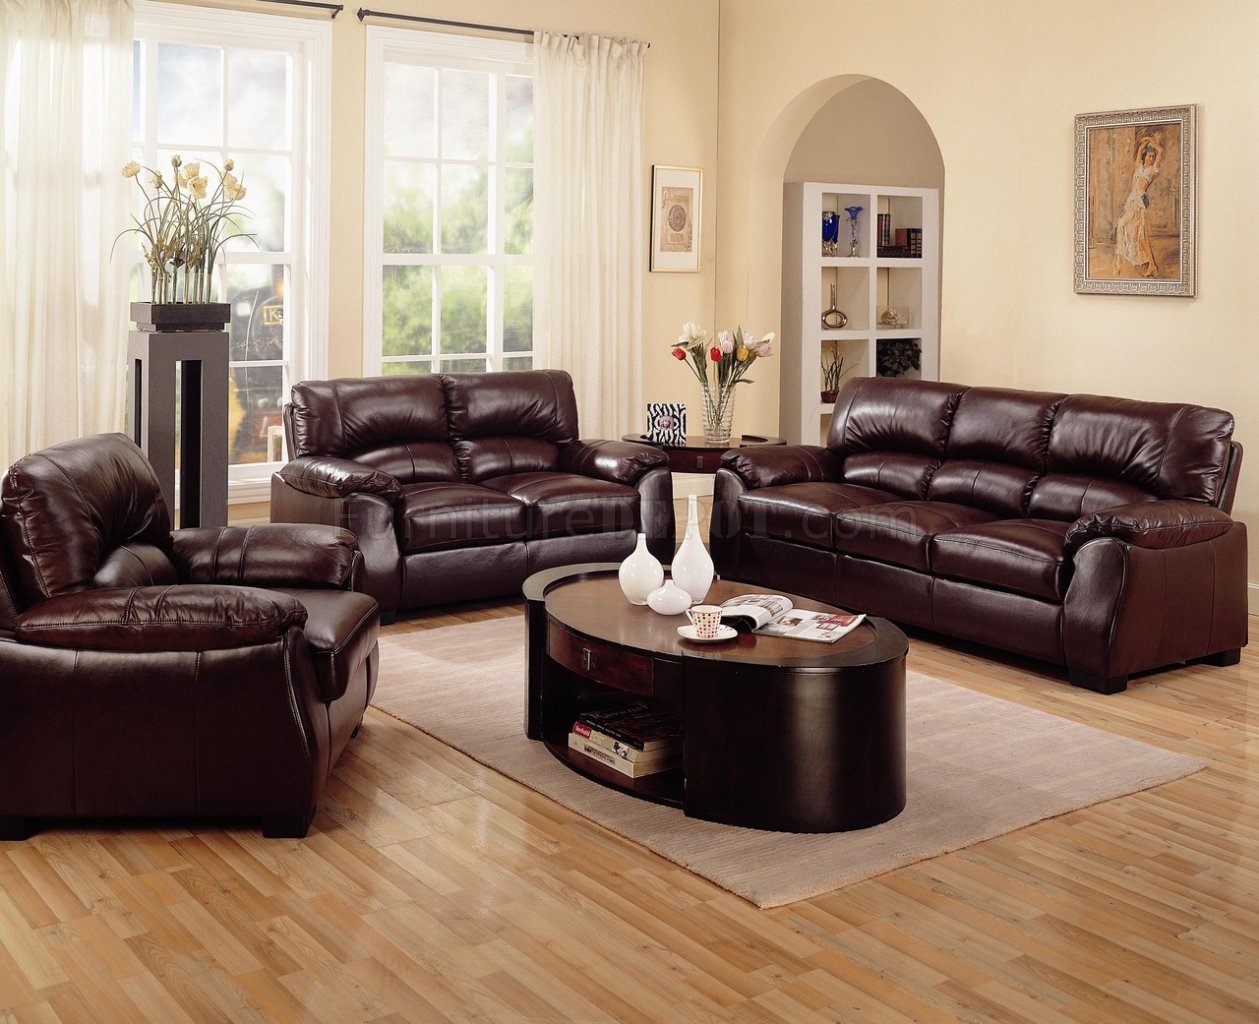 wall color with brown leather sofa